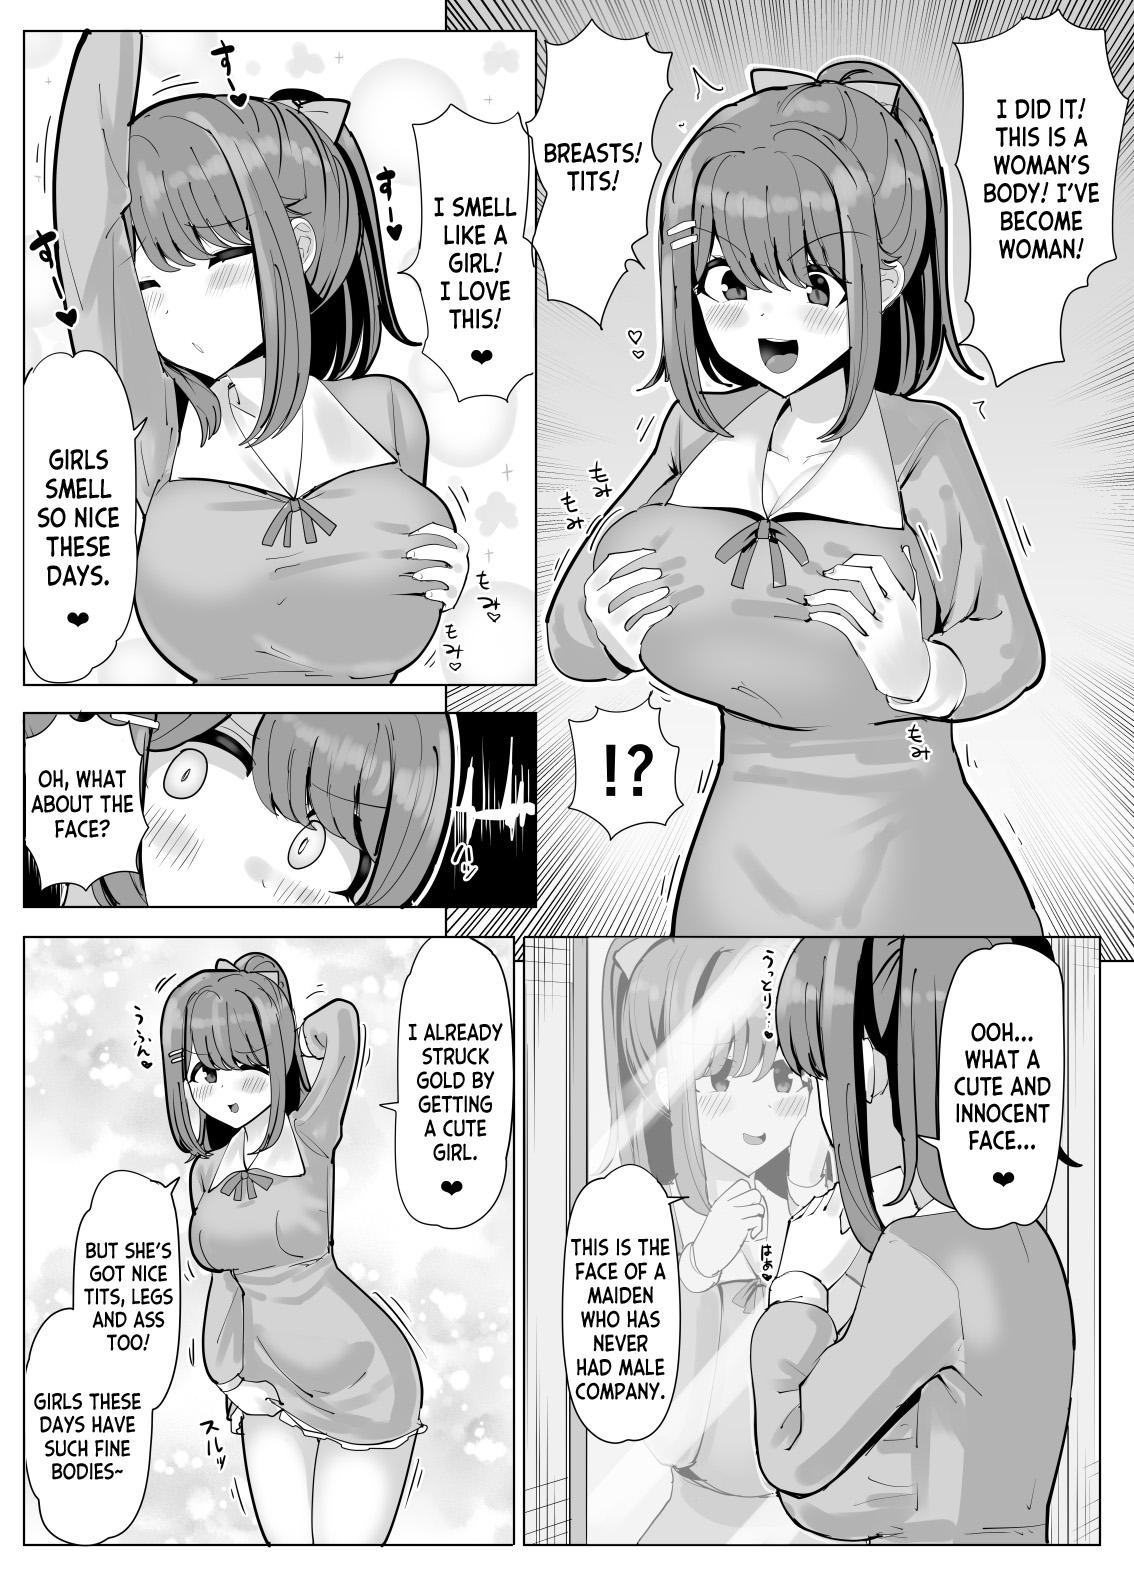 Doctor College Girl Taken Over by an Old Man 1+2 - Original Underwear - Page 3